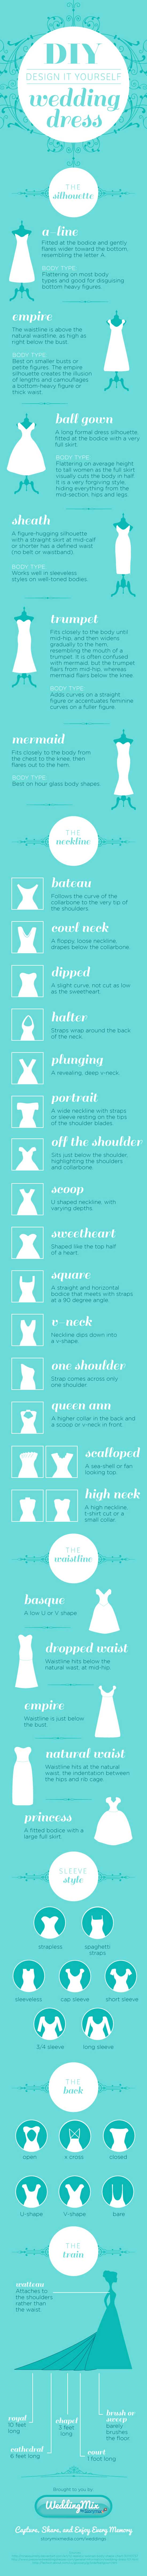 What's a watteau? Go to the salon with all the information you need to pick out your dream dress. Visit the blog post to print out the infographic and join our group boards so we can compare notes on the latest inspirations. DIY Wedding Dress Infographic from @WeddingMix.